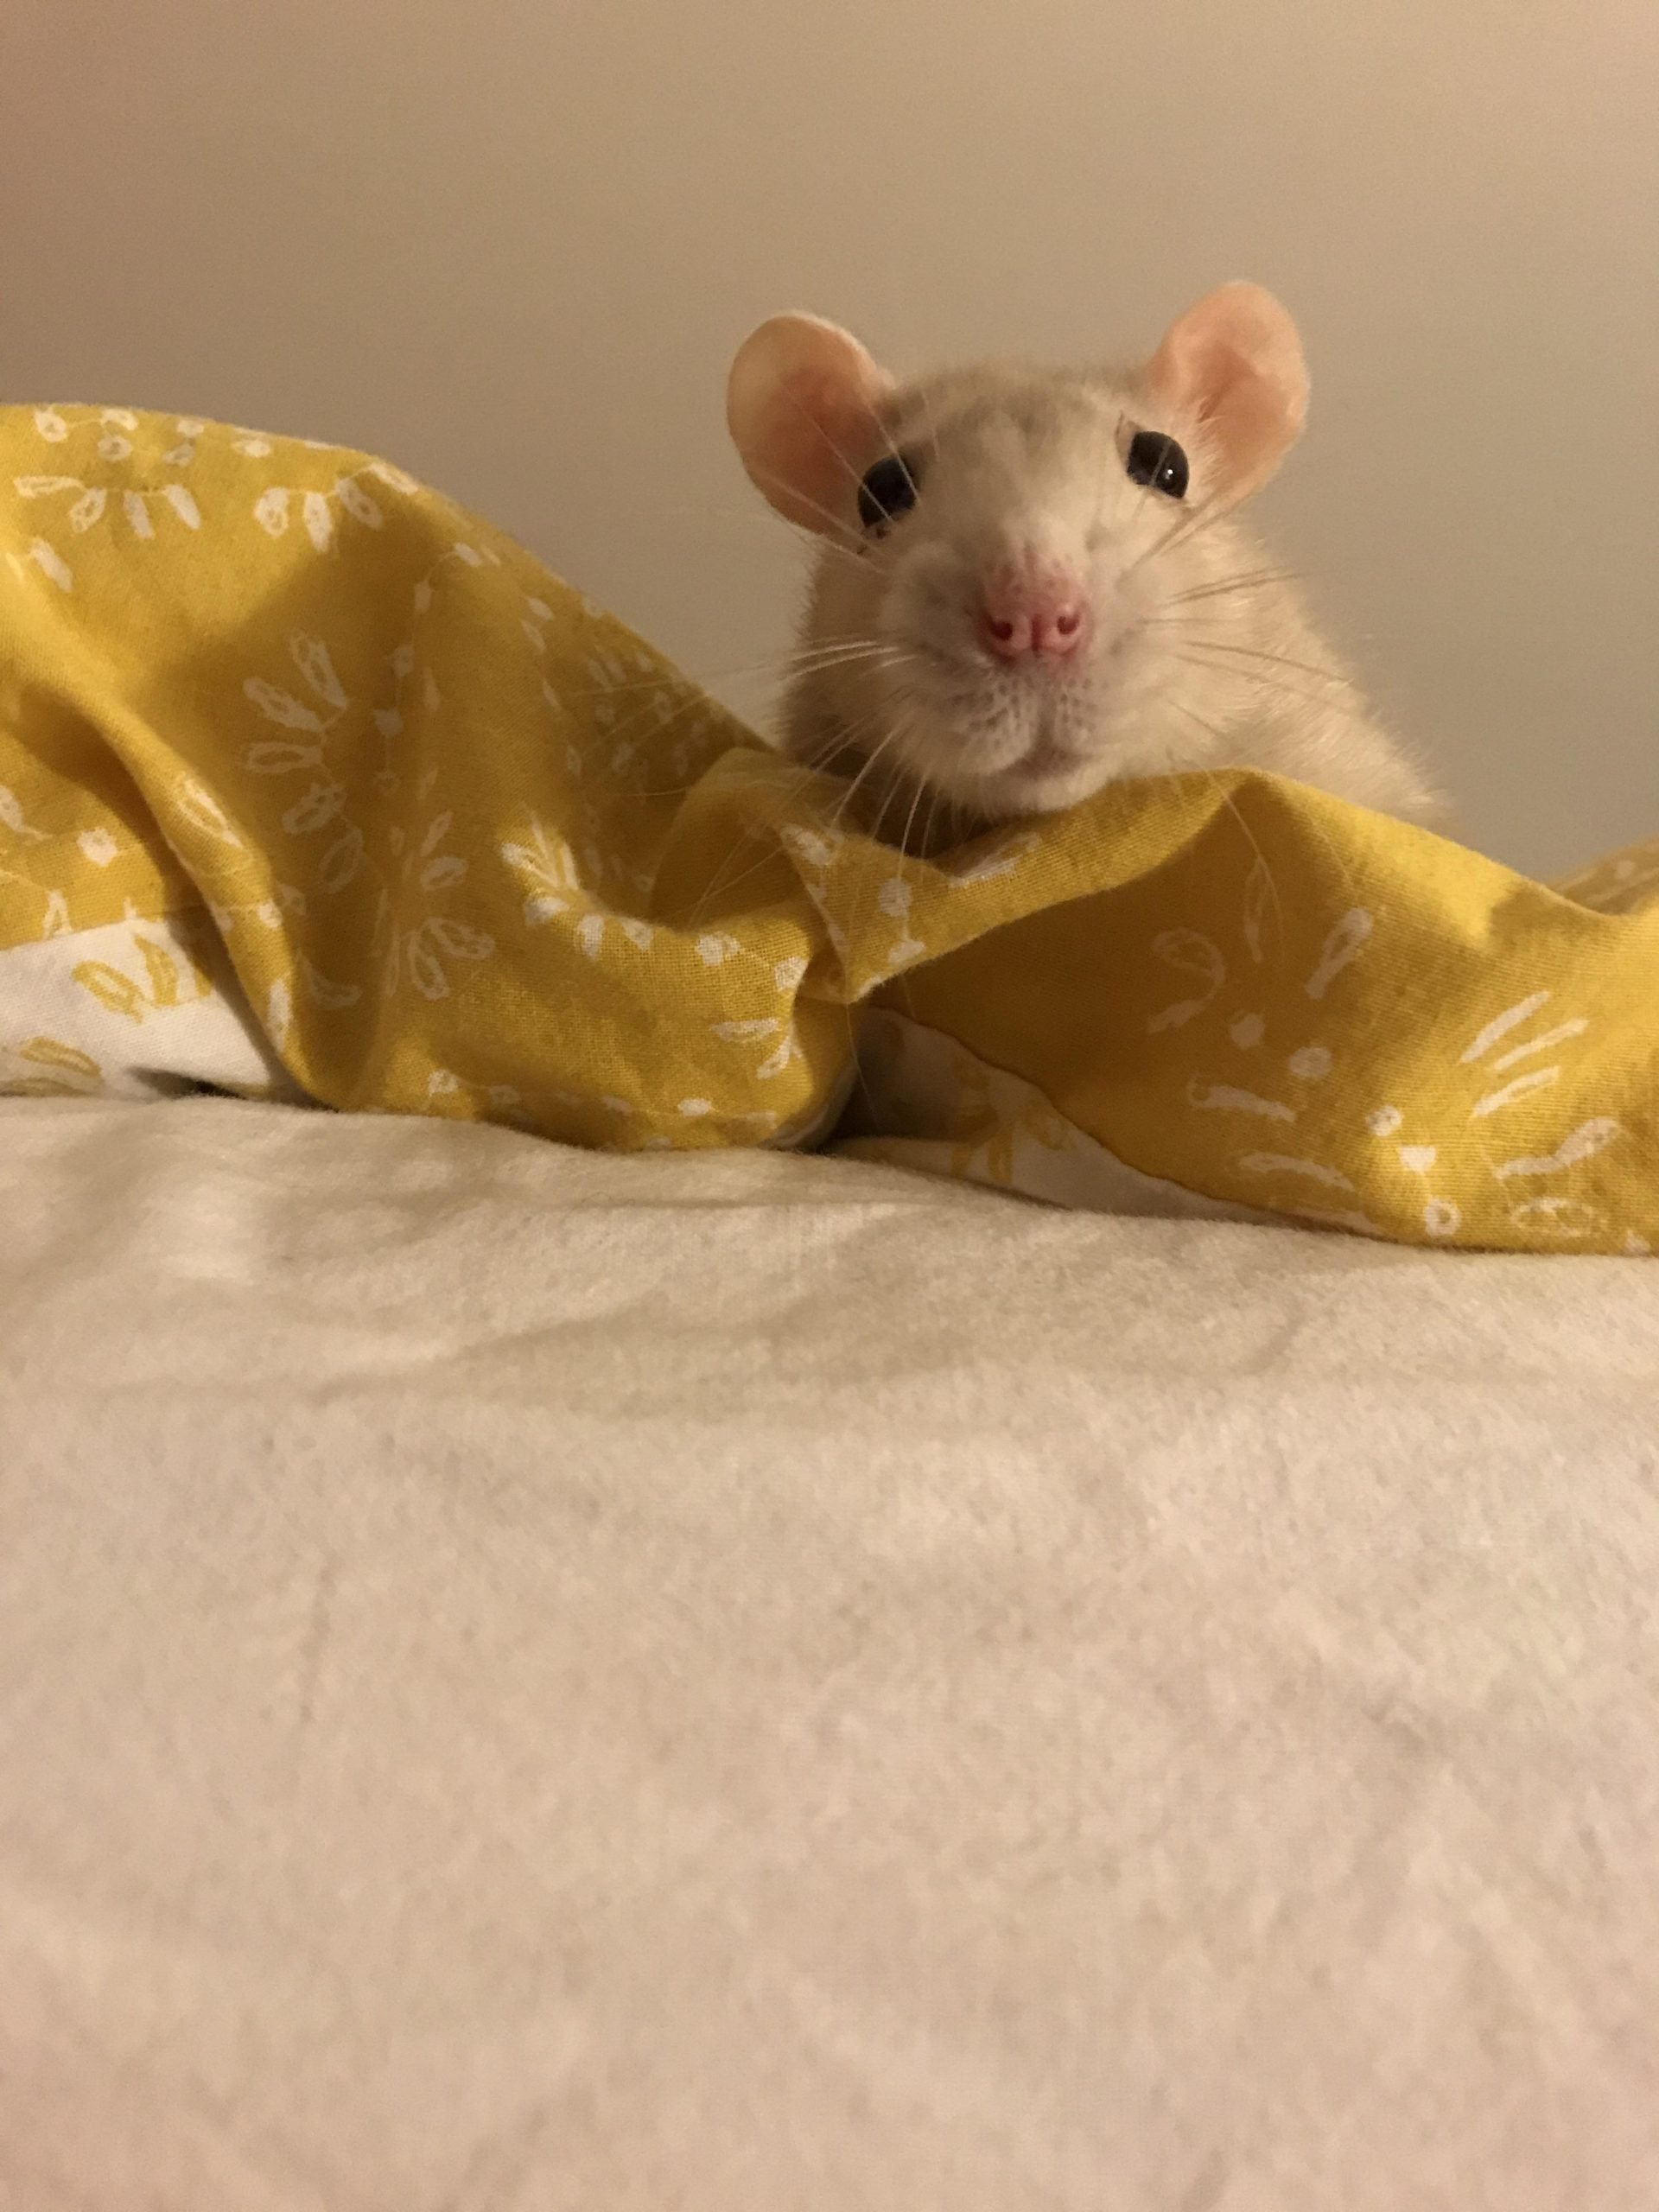 âWhat do you mean I canât eat crackers in your bed?â? : RATS